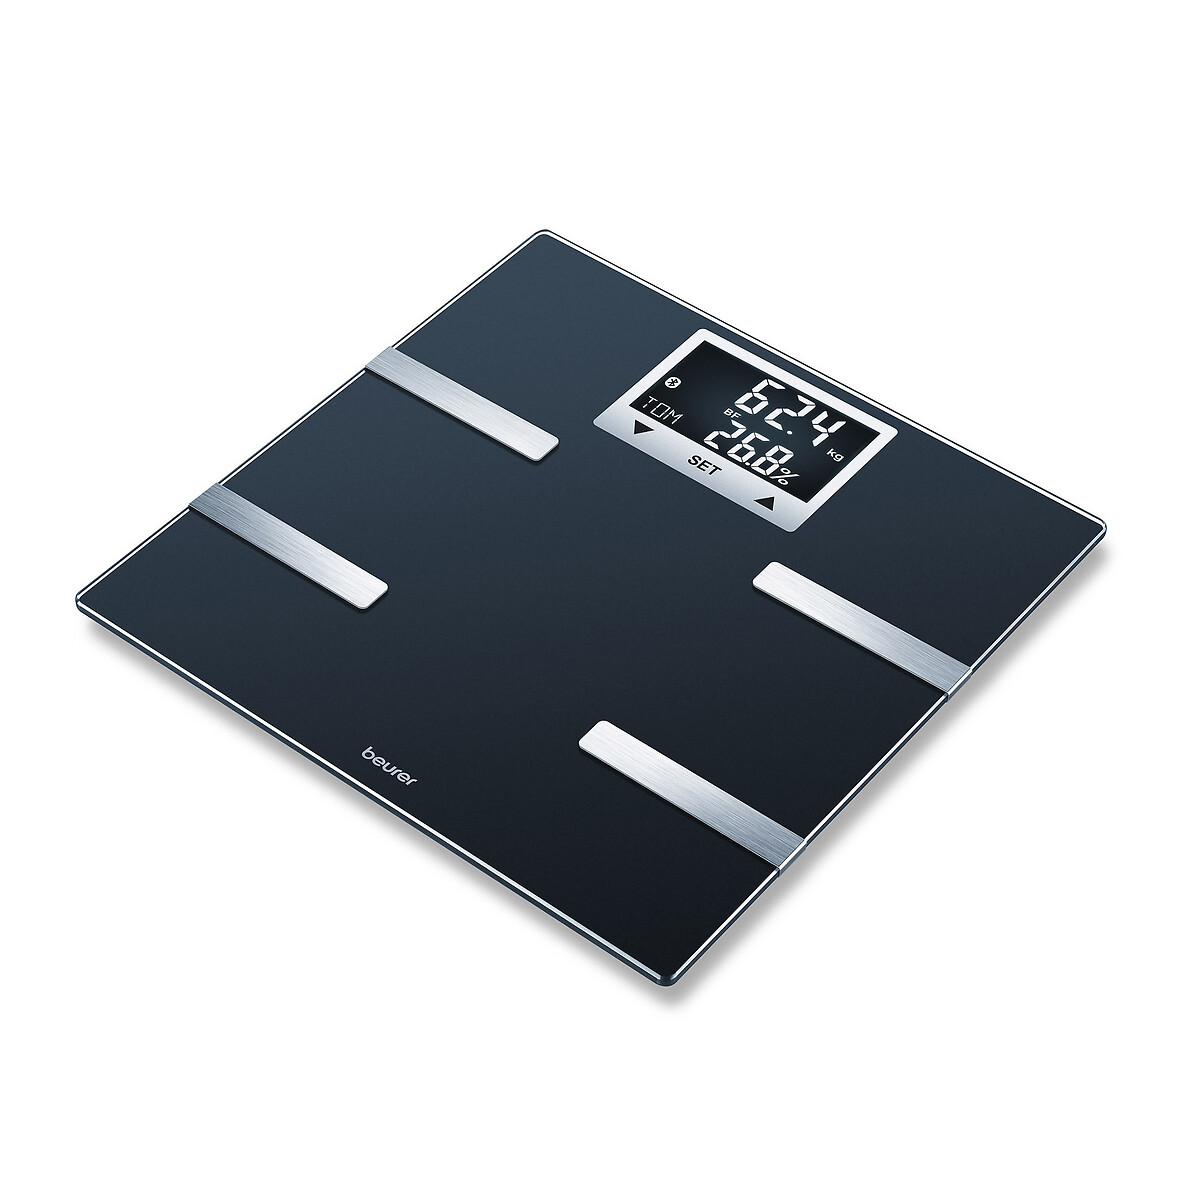 BF 720 Connected Personal Weighing Scales